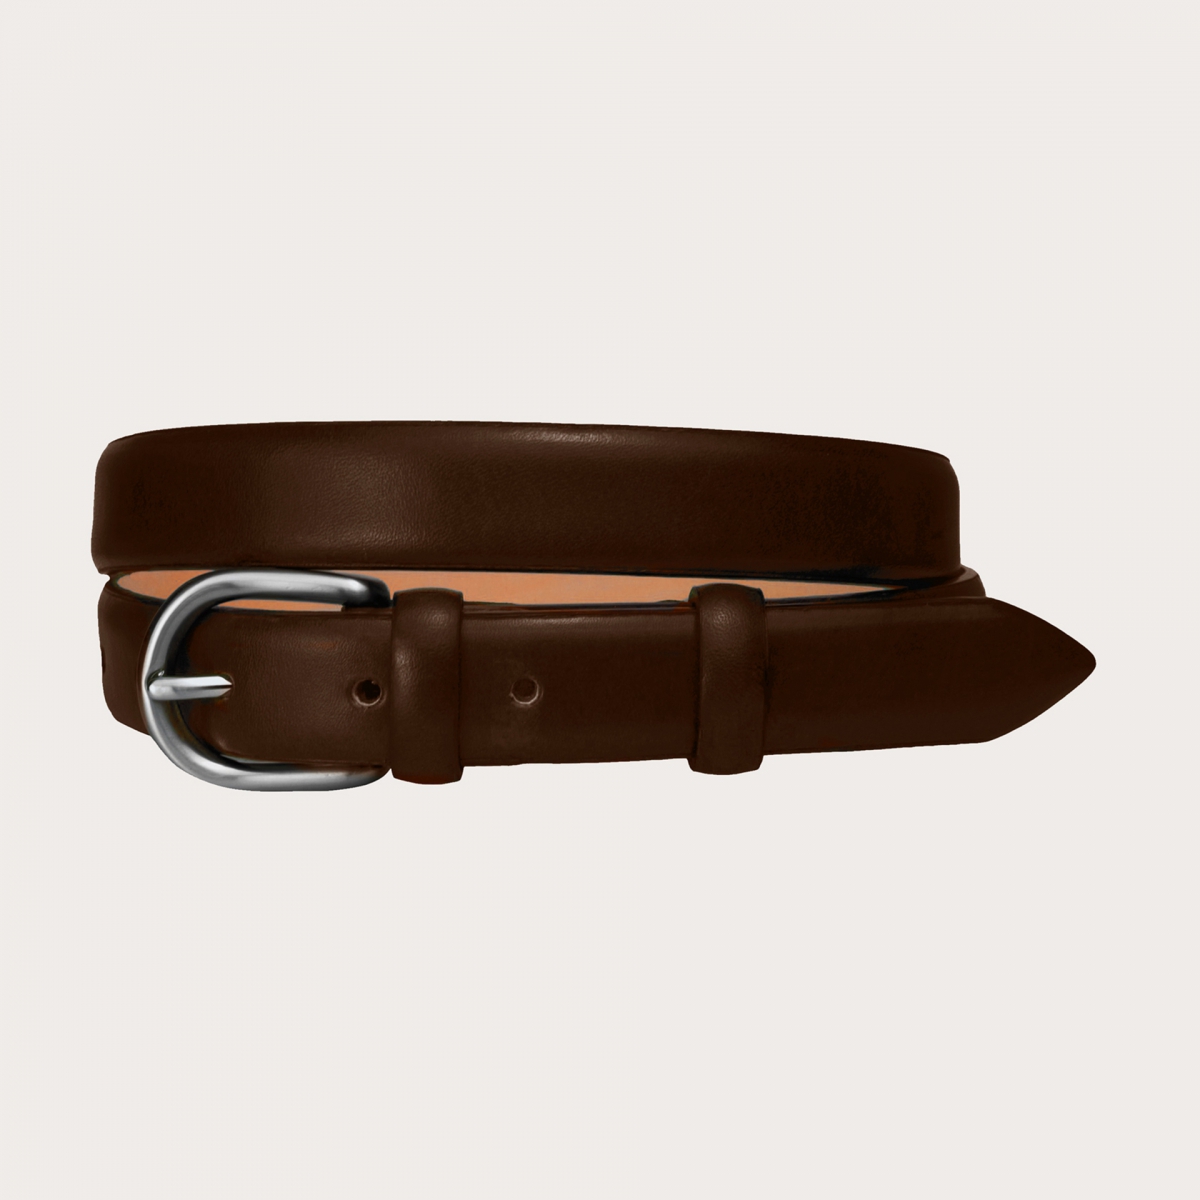 BRUCLE Women's belt in brown Florentine leather